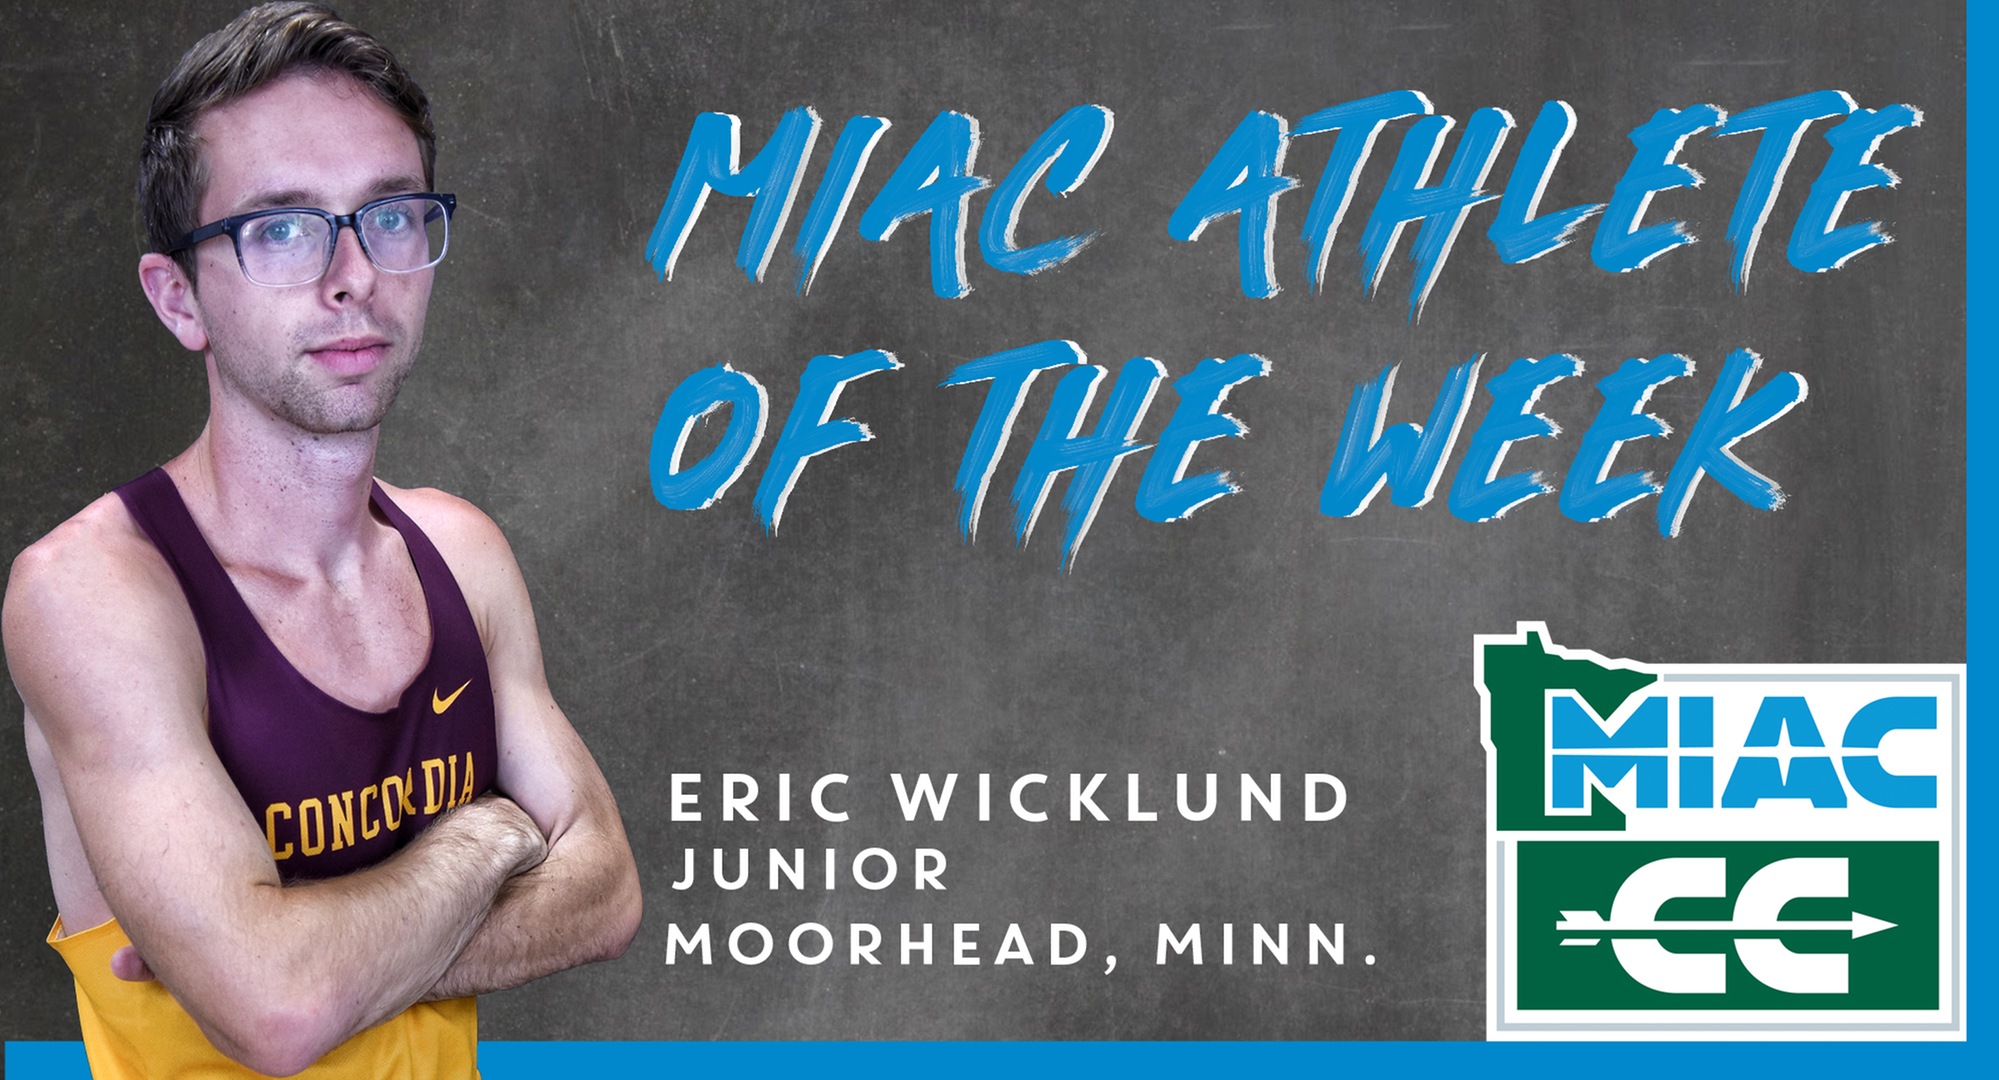 Eric Wicklund was named the MIAC Athlete of the Week after winning the Jamestown Invitational.